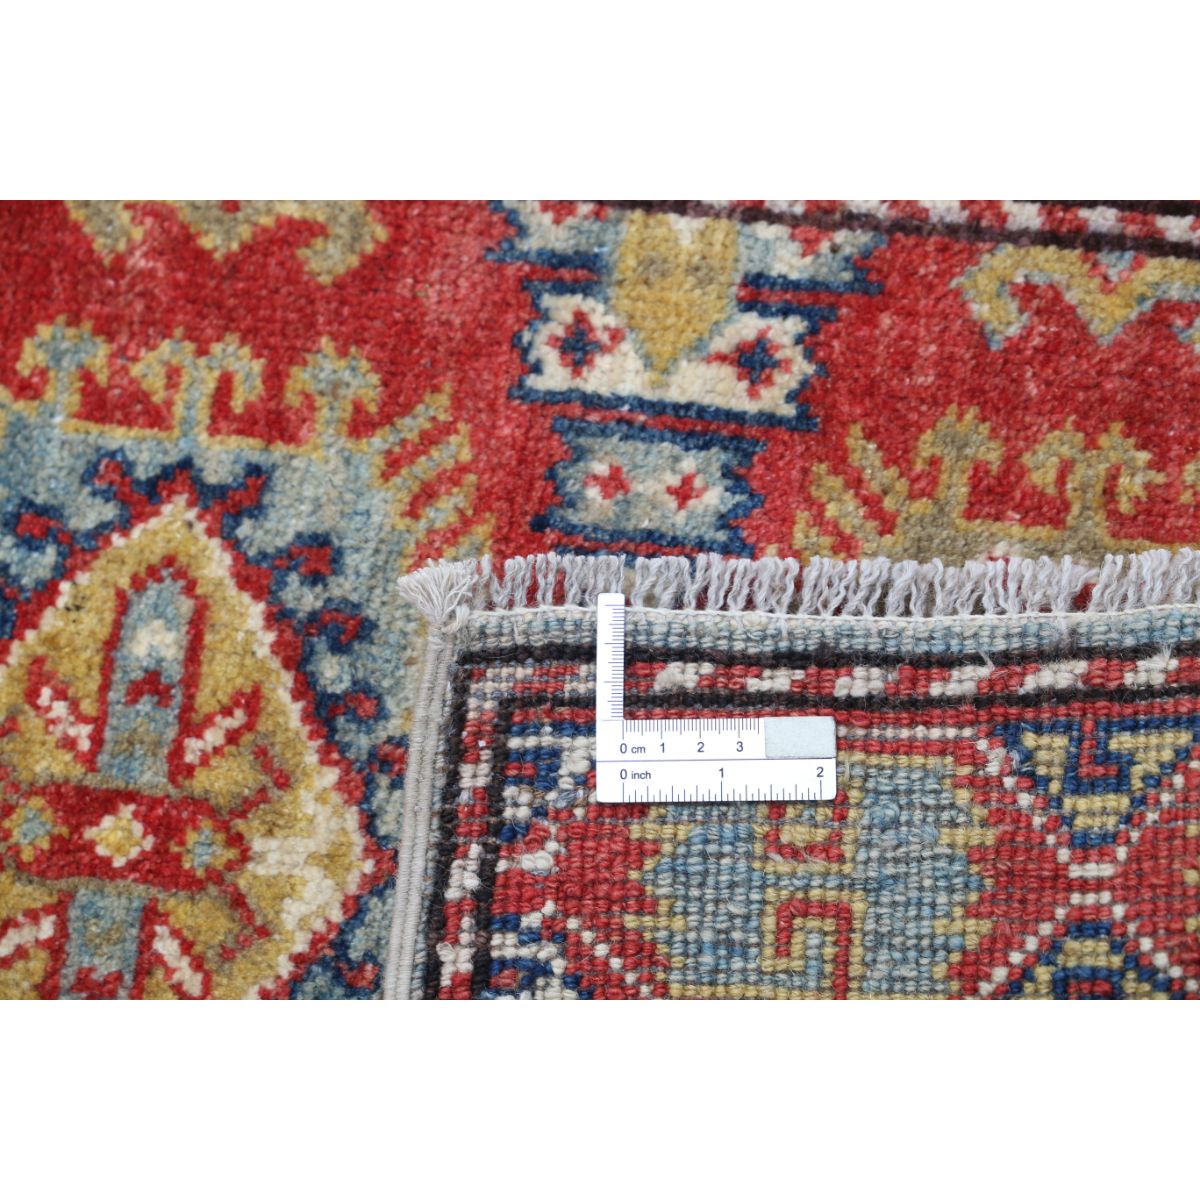 Revival 2' 0" X 3' 3" Wool Hand Knotted Rug